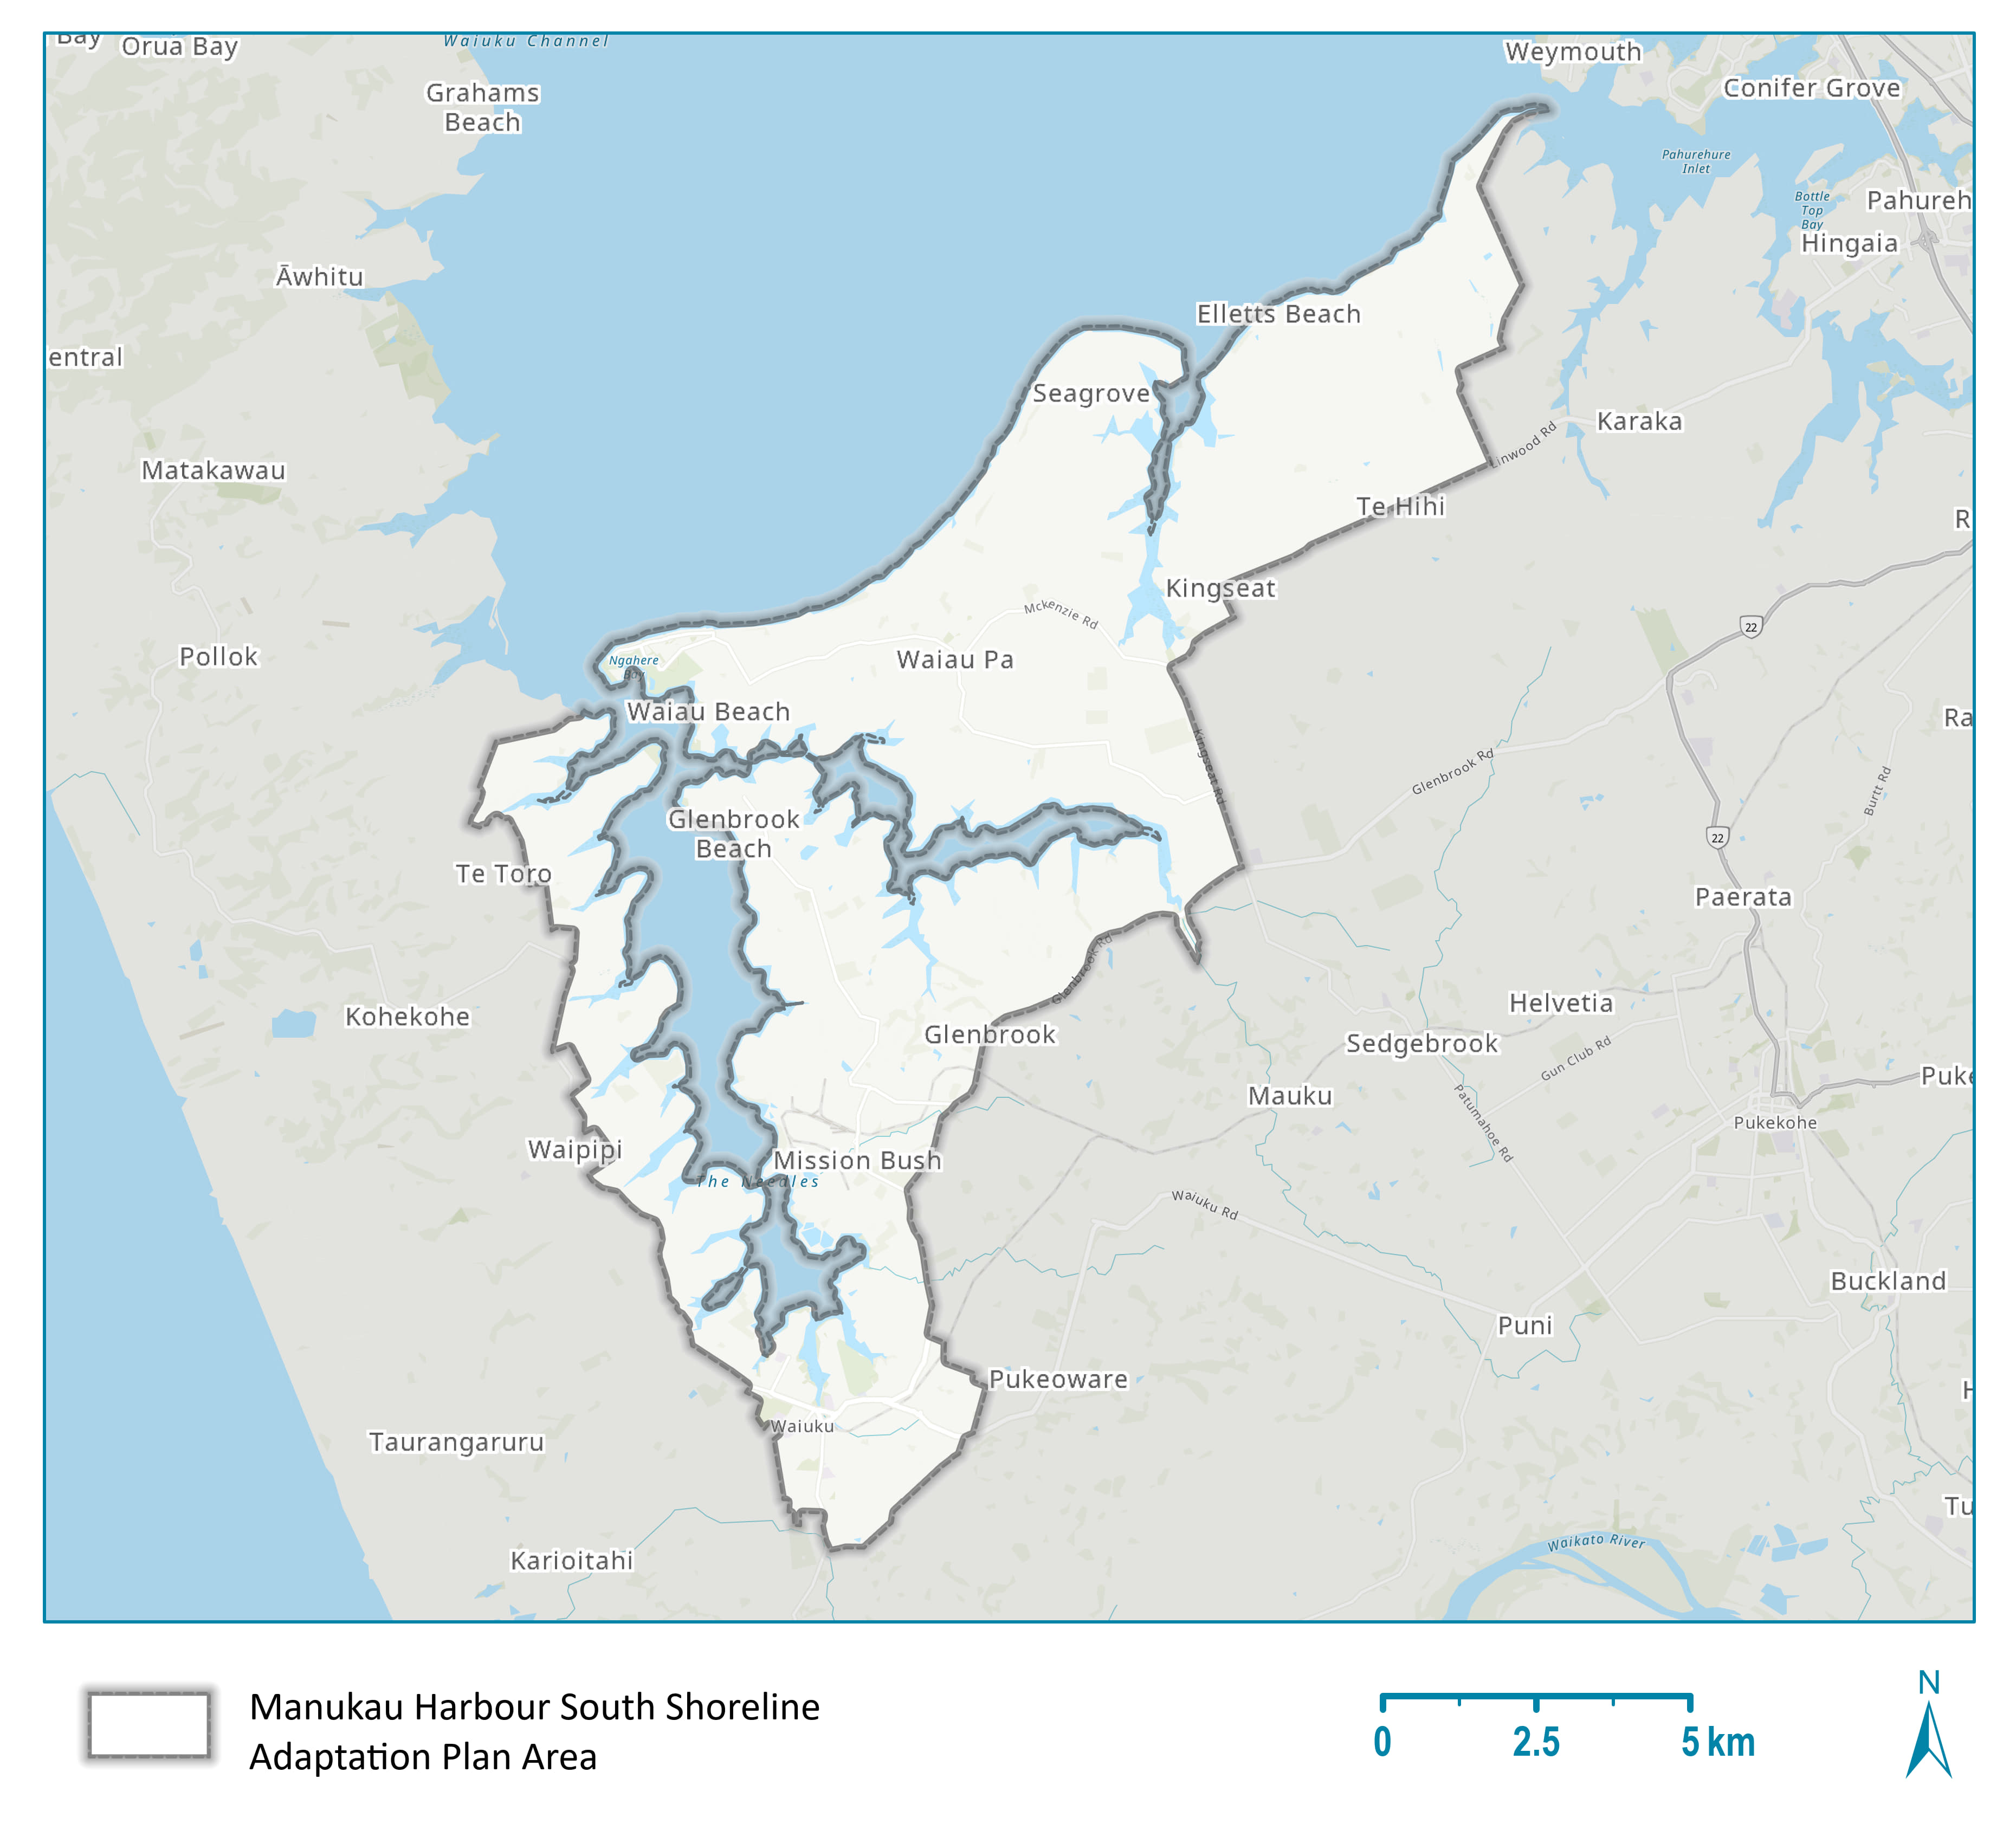 This map shows the area covered by the Manukau Harbour South Shoreline Adaptation Plan.